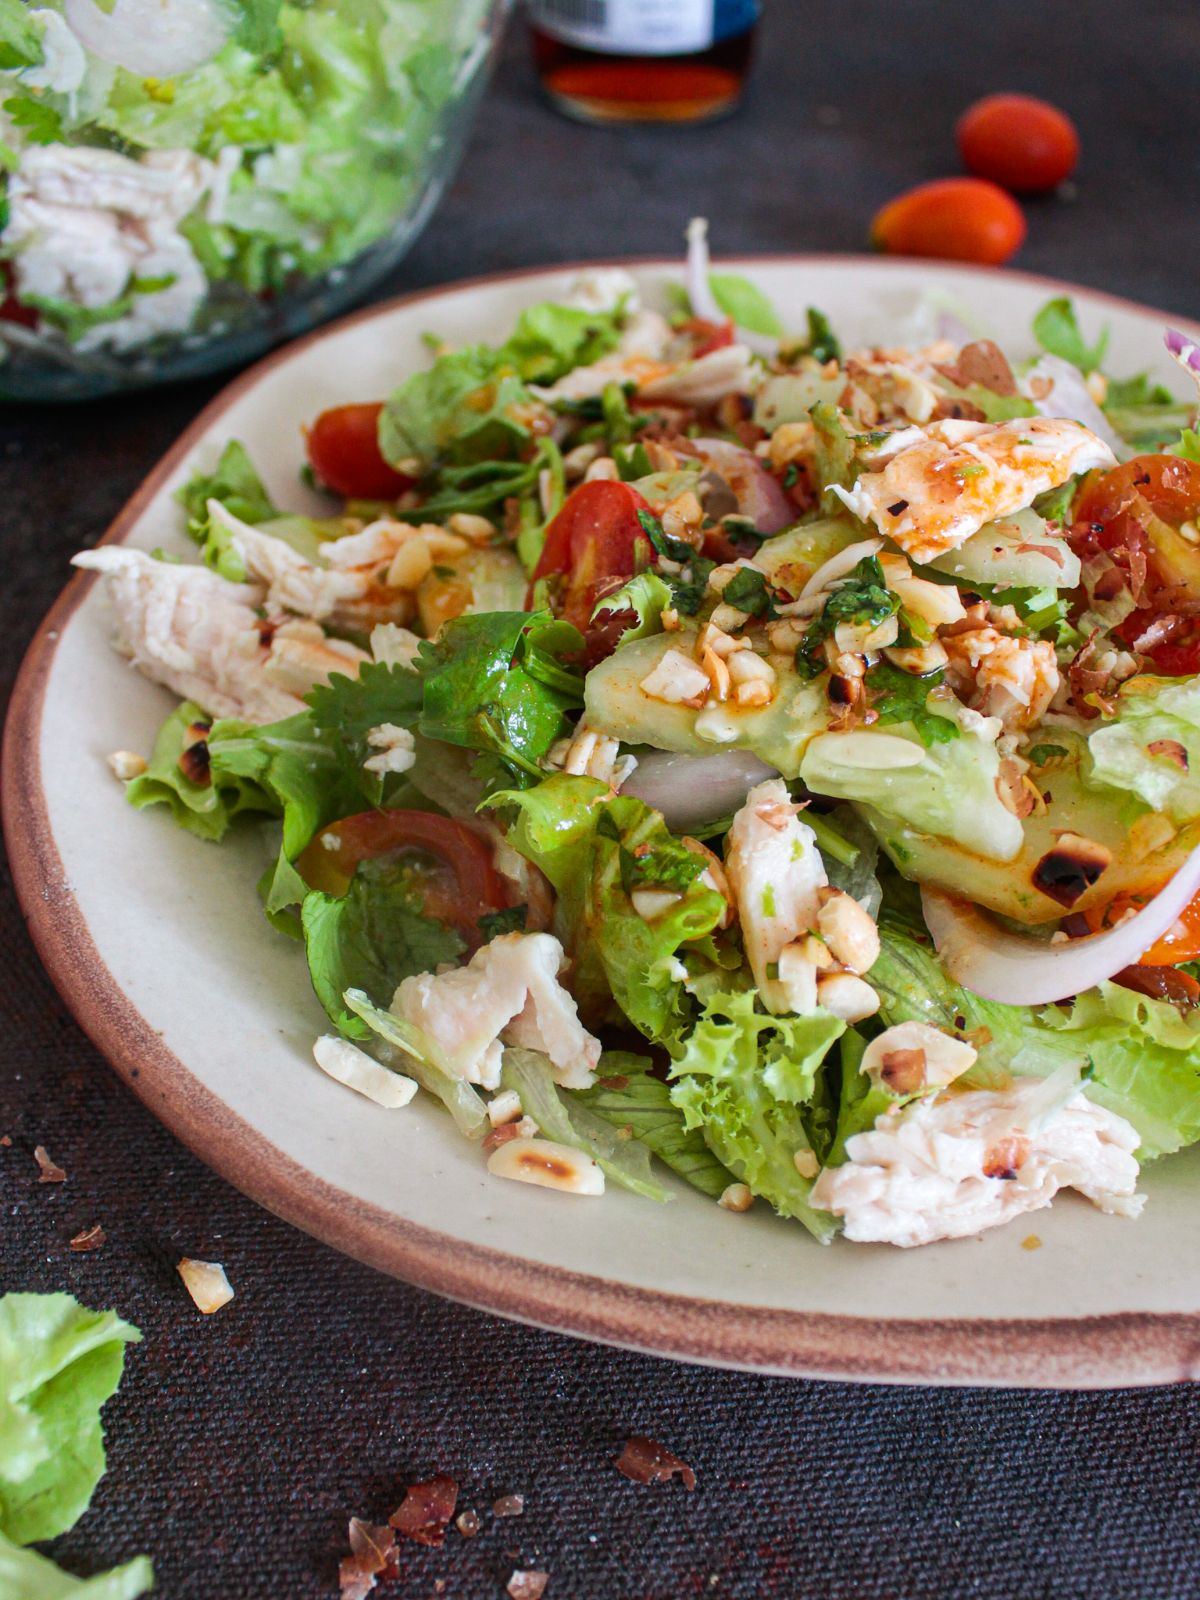 plate of salad with red peppers and chicken on black table